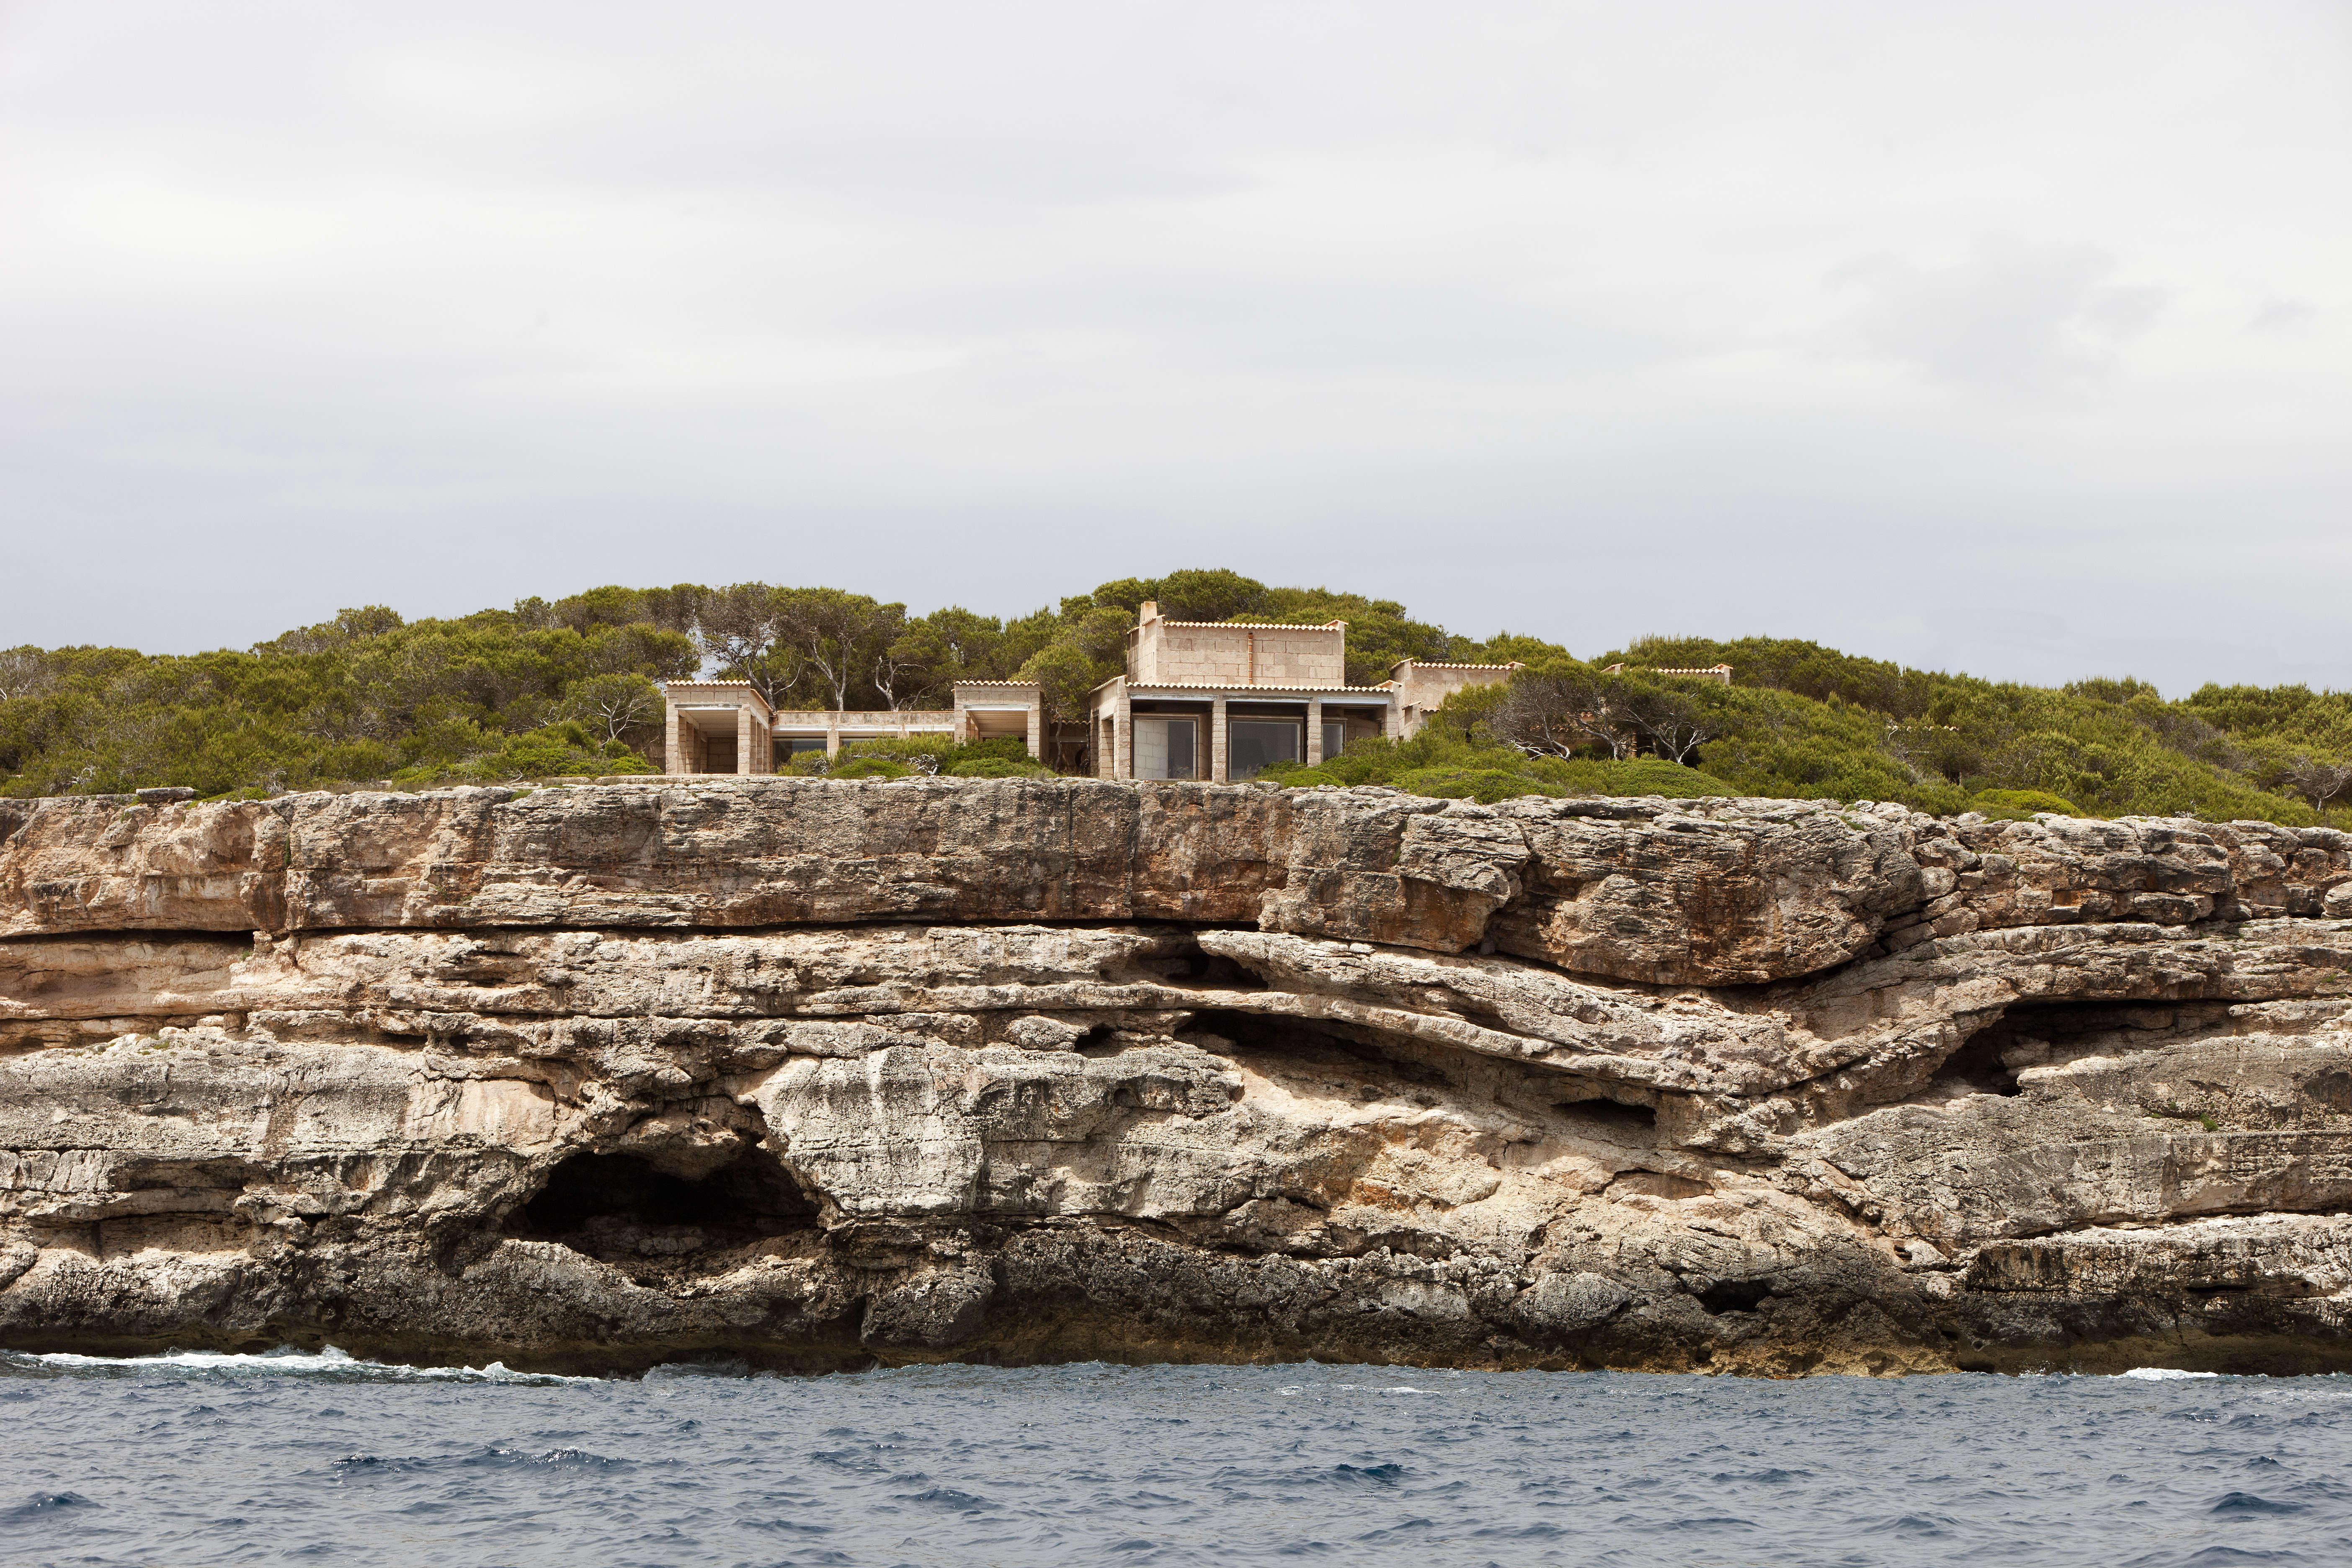 As was the holistic intention of Utzon, the house appears to have cropped up out of the surrounding rock.